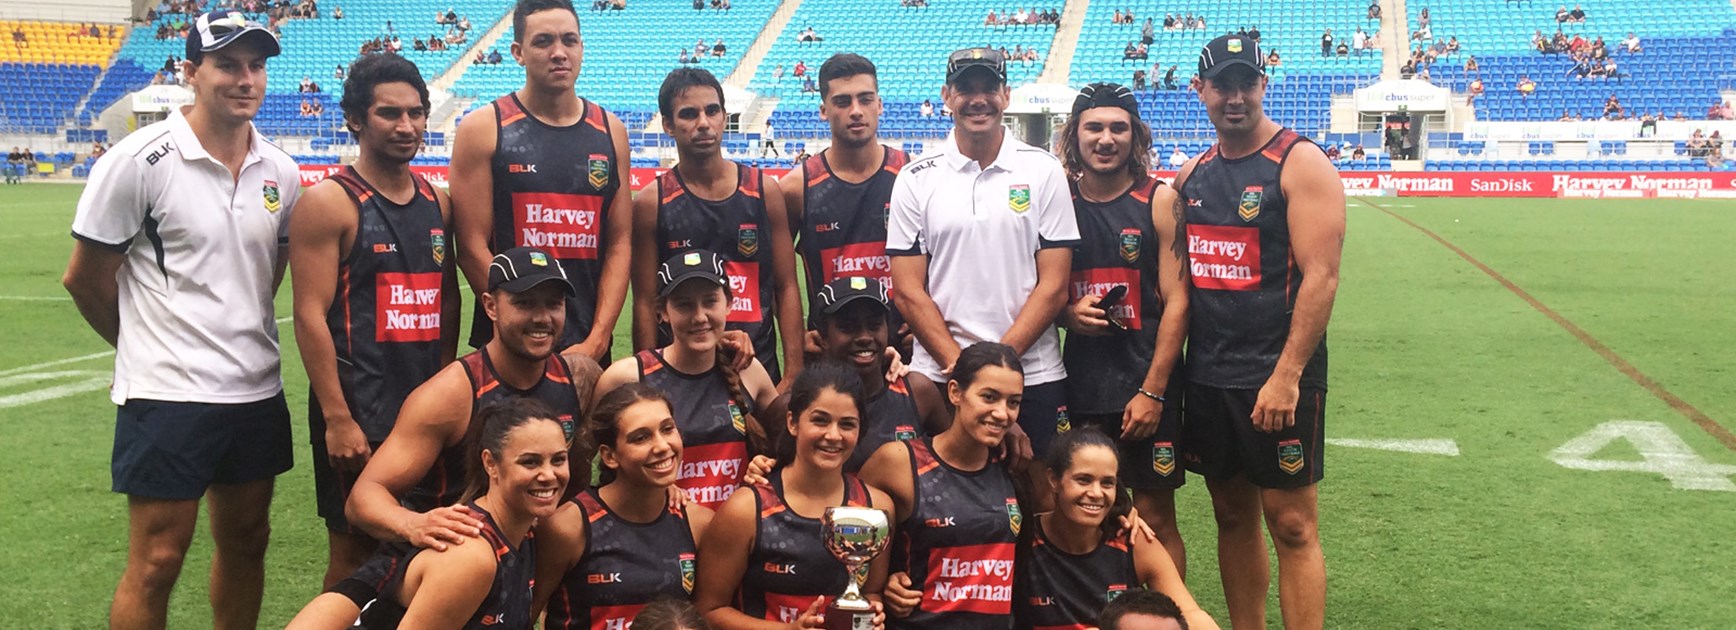 The TFA Indigenous All Stars will take on the Touch Football Australia All Stars at Suncorp Stadium on February 13.